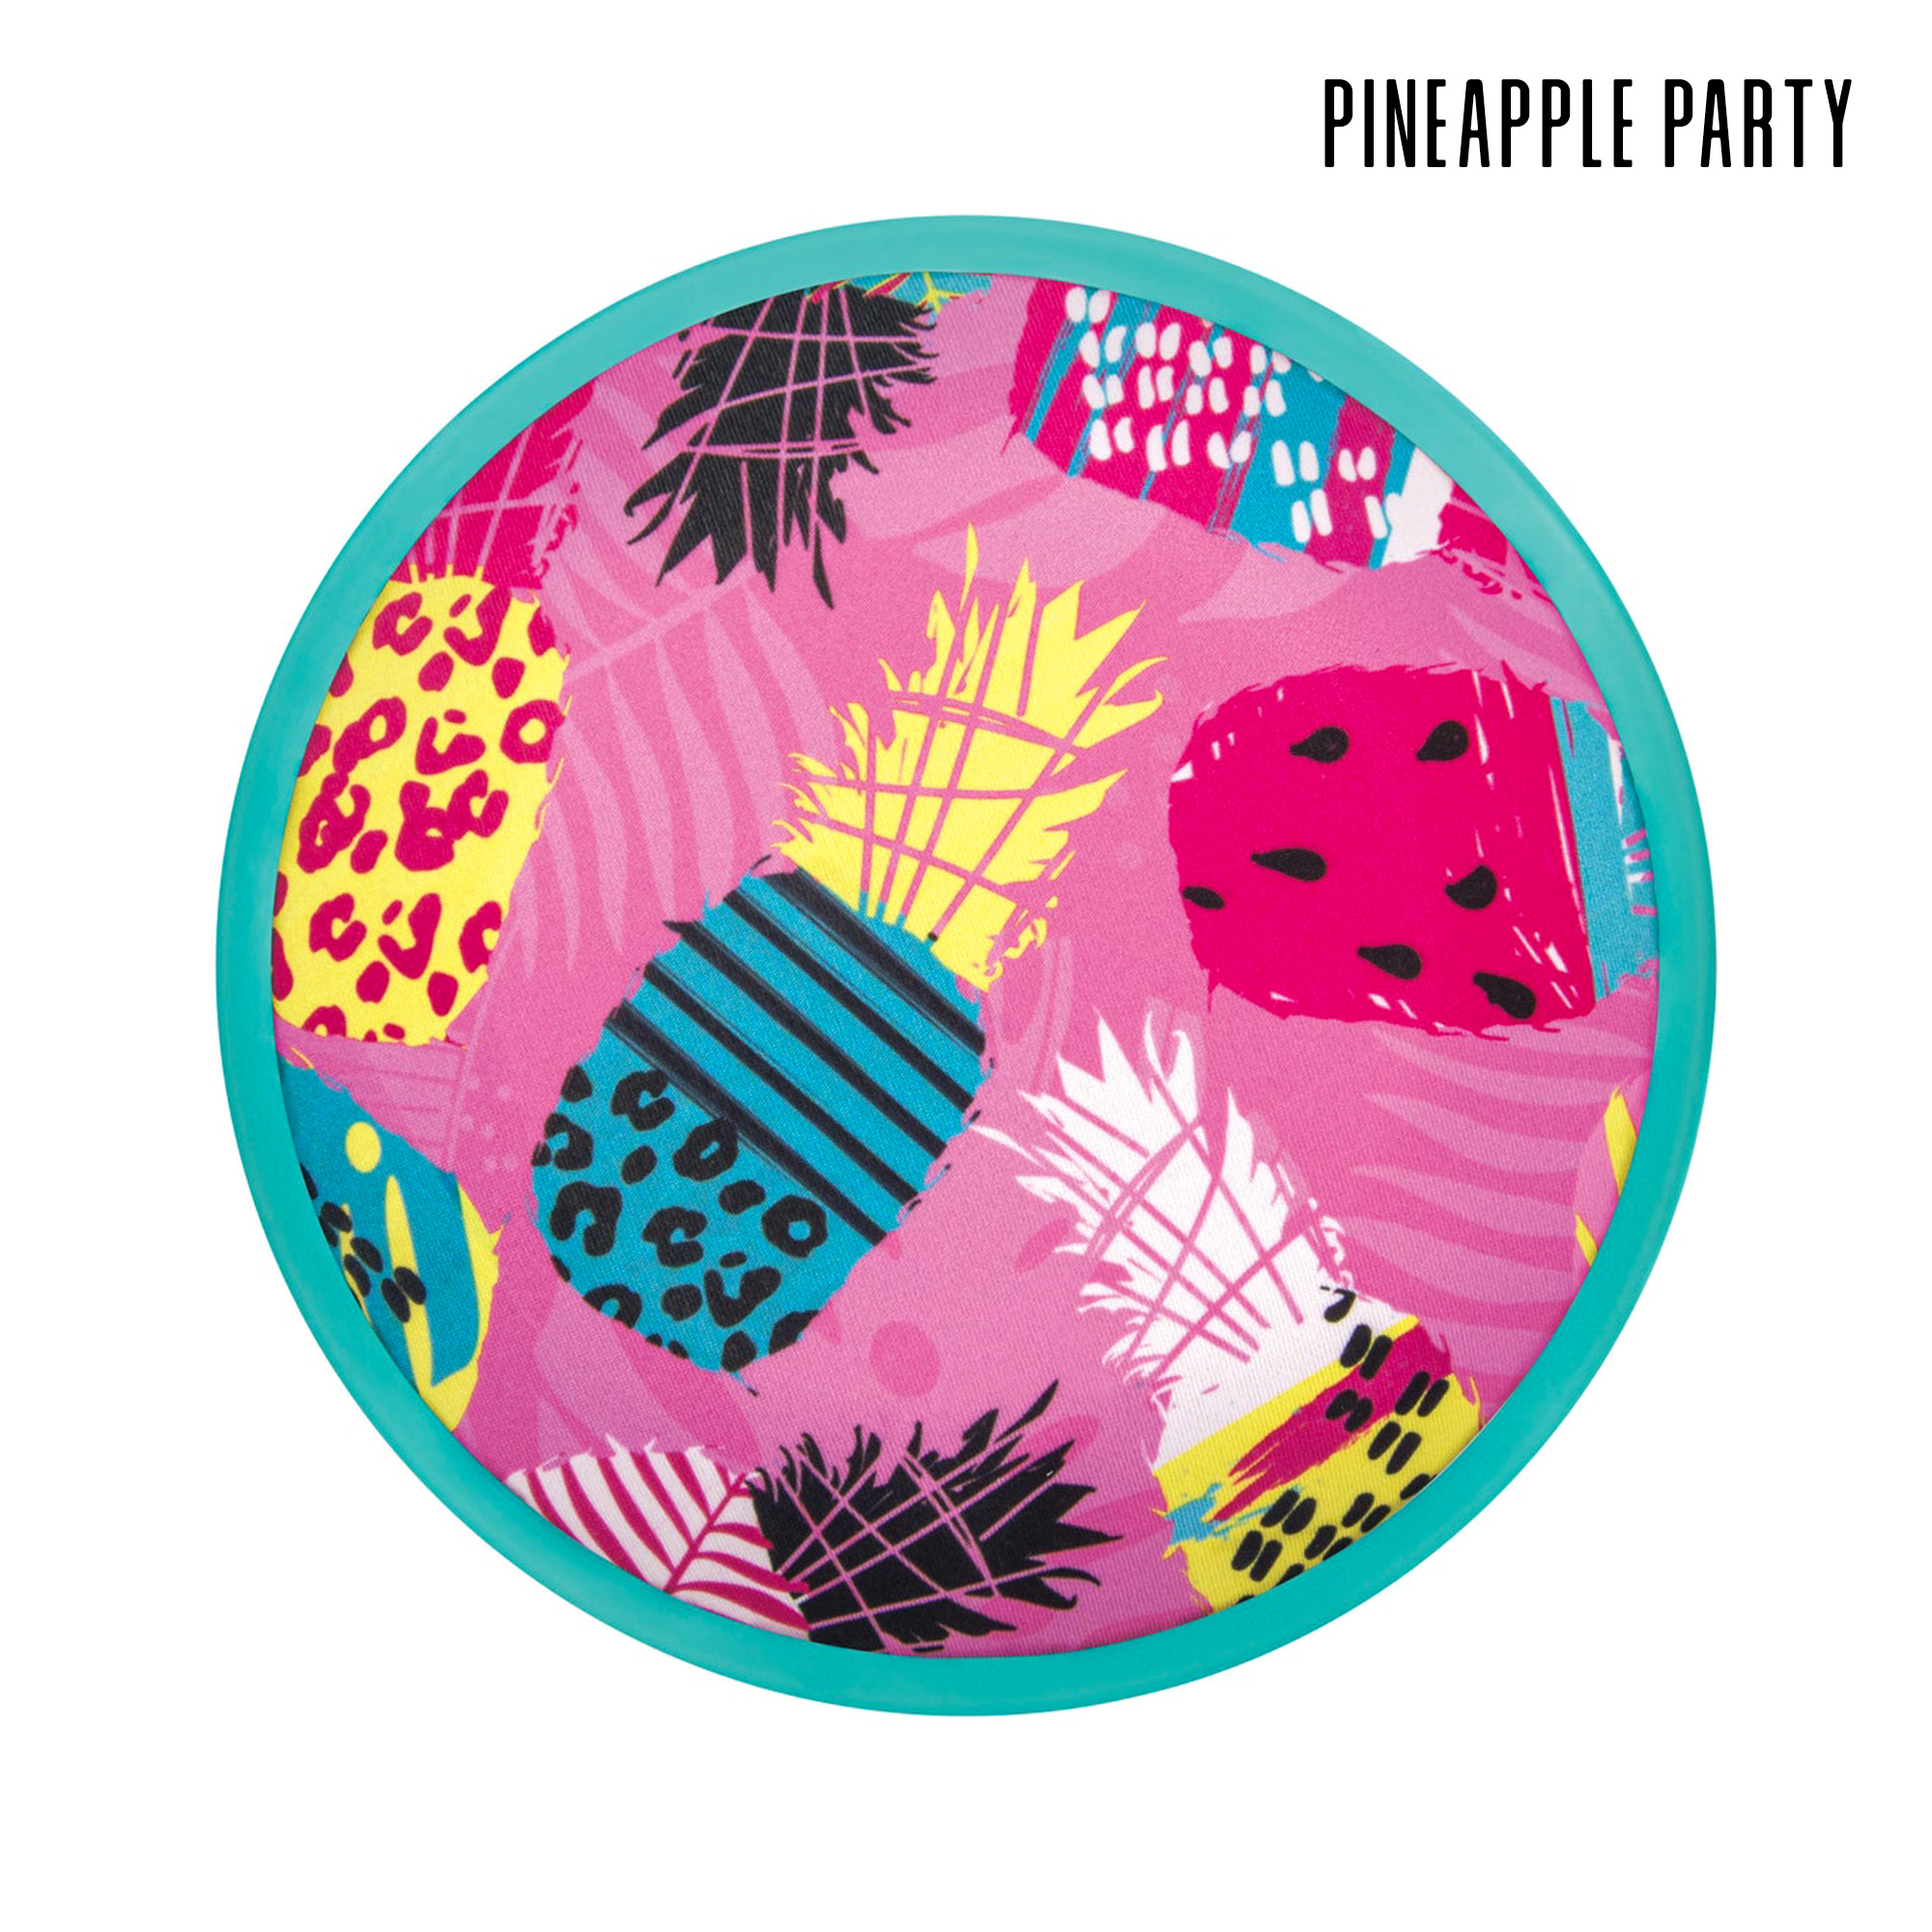 Waboba Flobo Floating Water Catch Disc. Pineapple Party design.